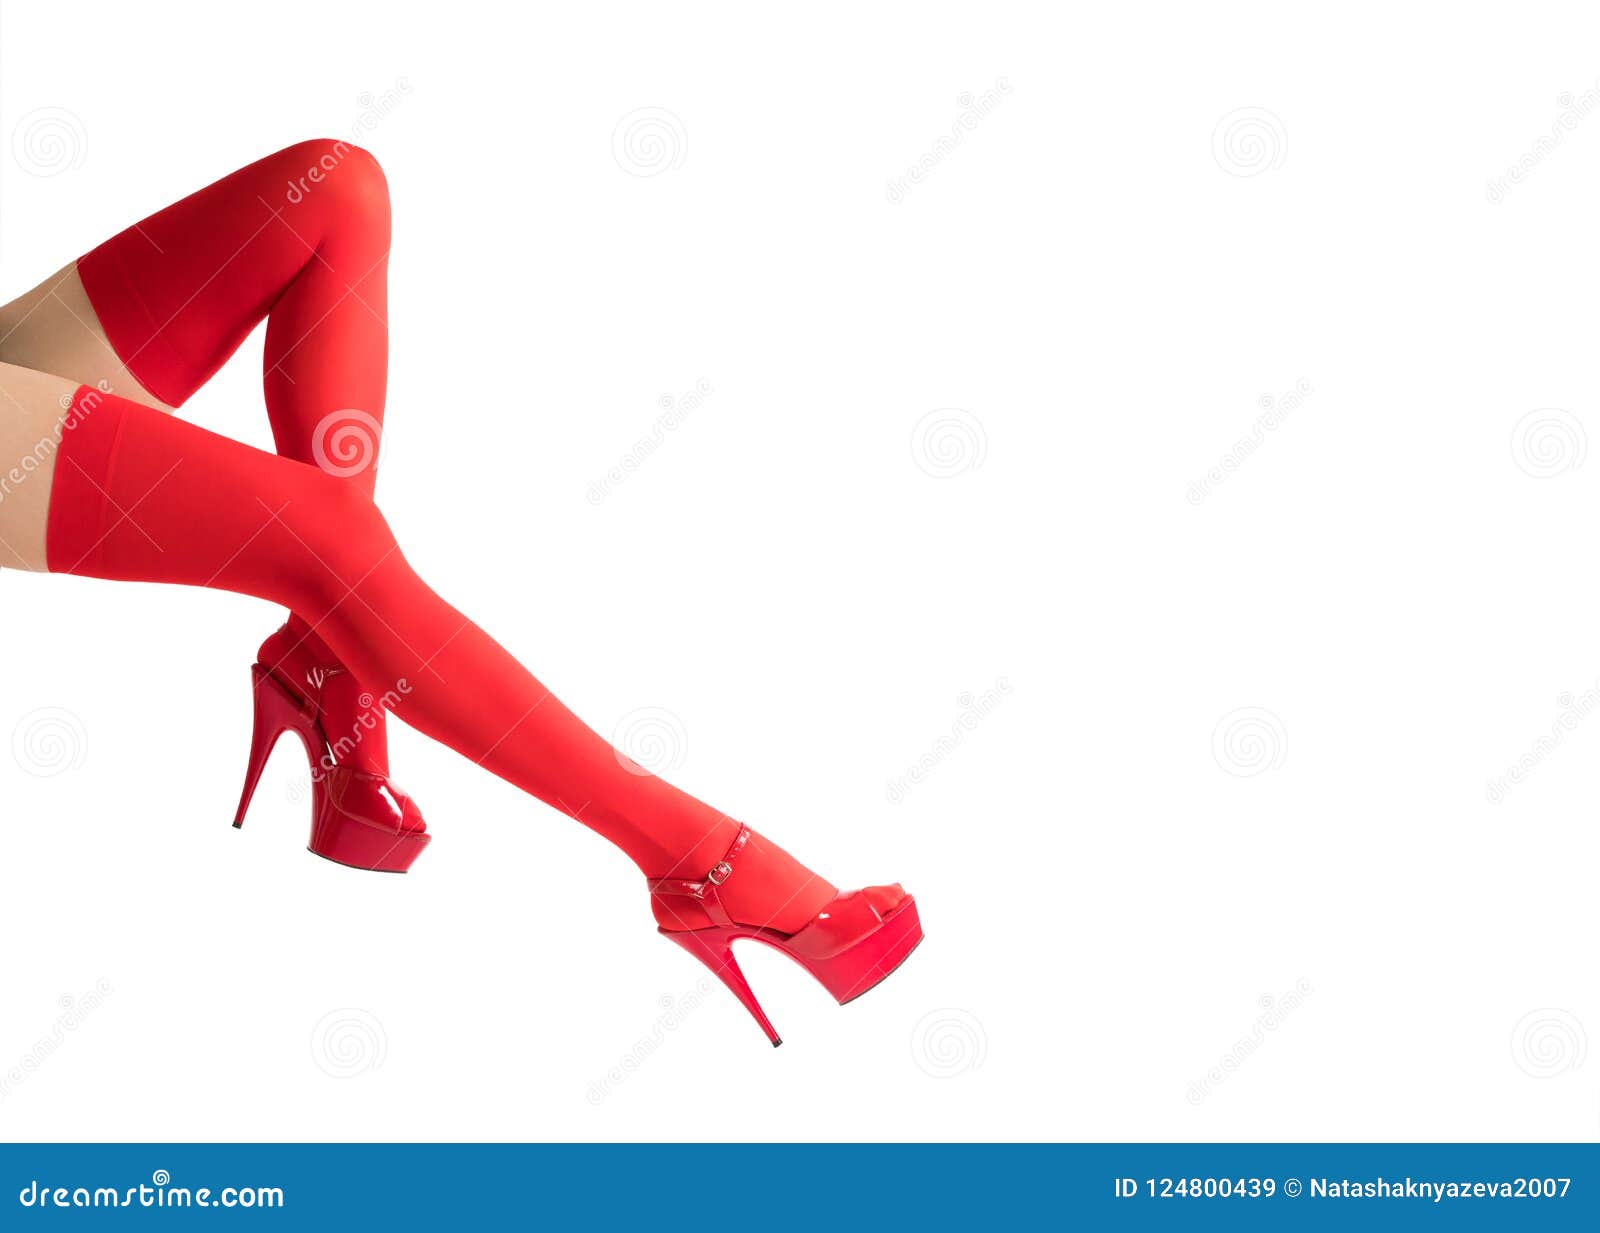 Female Legs In Fetish Red Stockings And Red High Heels Isolated On White Stock Image Image Of